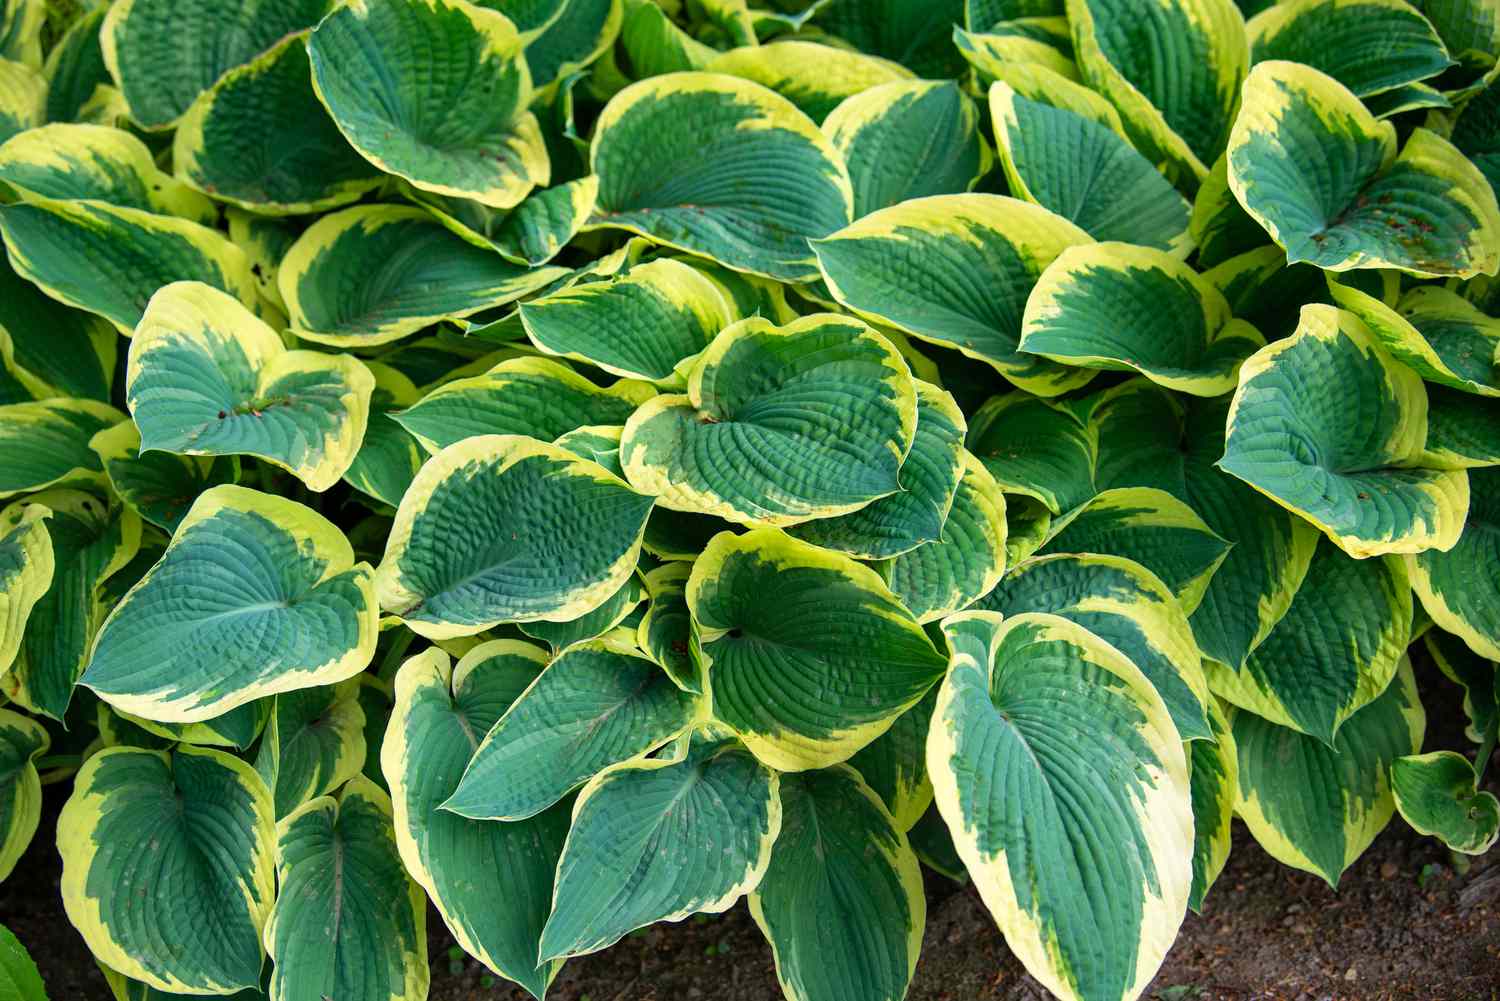 Hosta plant with variegated yellow and green leaves clustered together